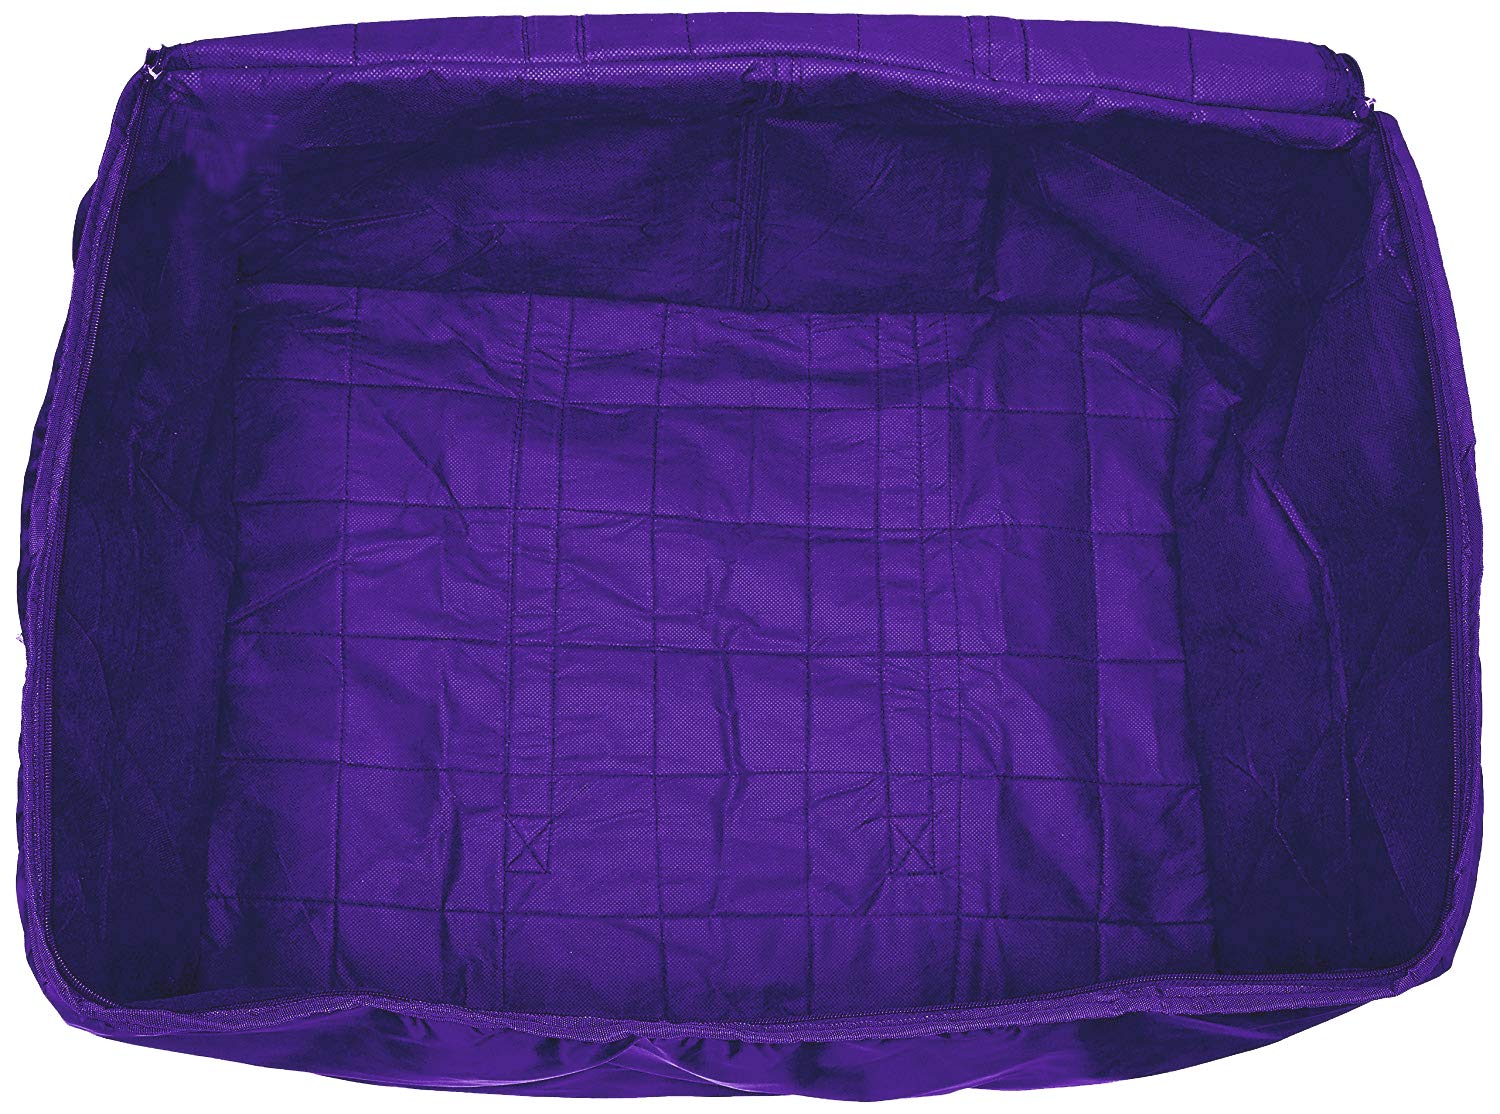 Kuber Industries Parachute Big Underbed Rectangular Moisture Proof Storage Bag with Zippered Closure and Handle (Royal Blue, CTKTC6327, Standard)